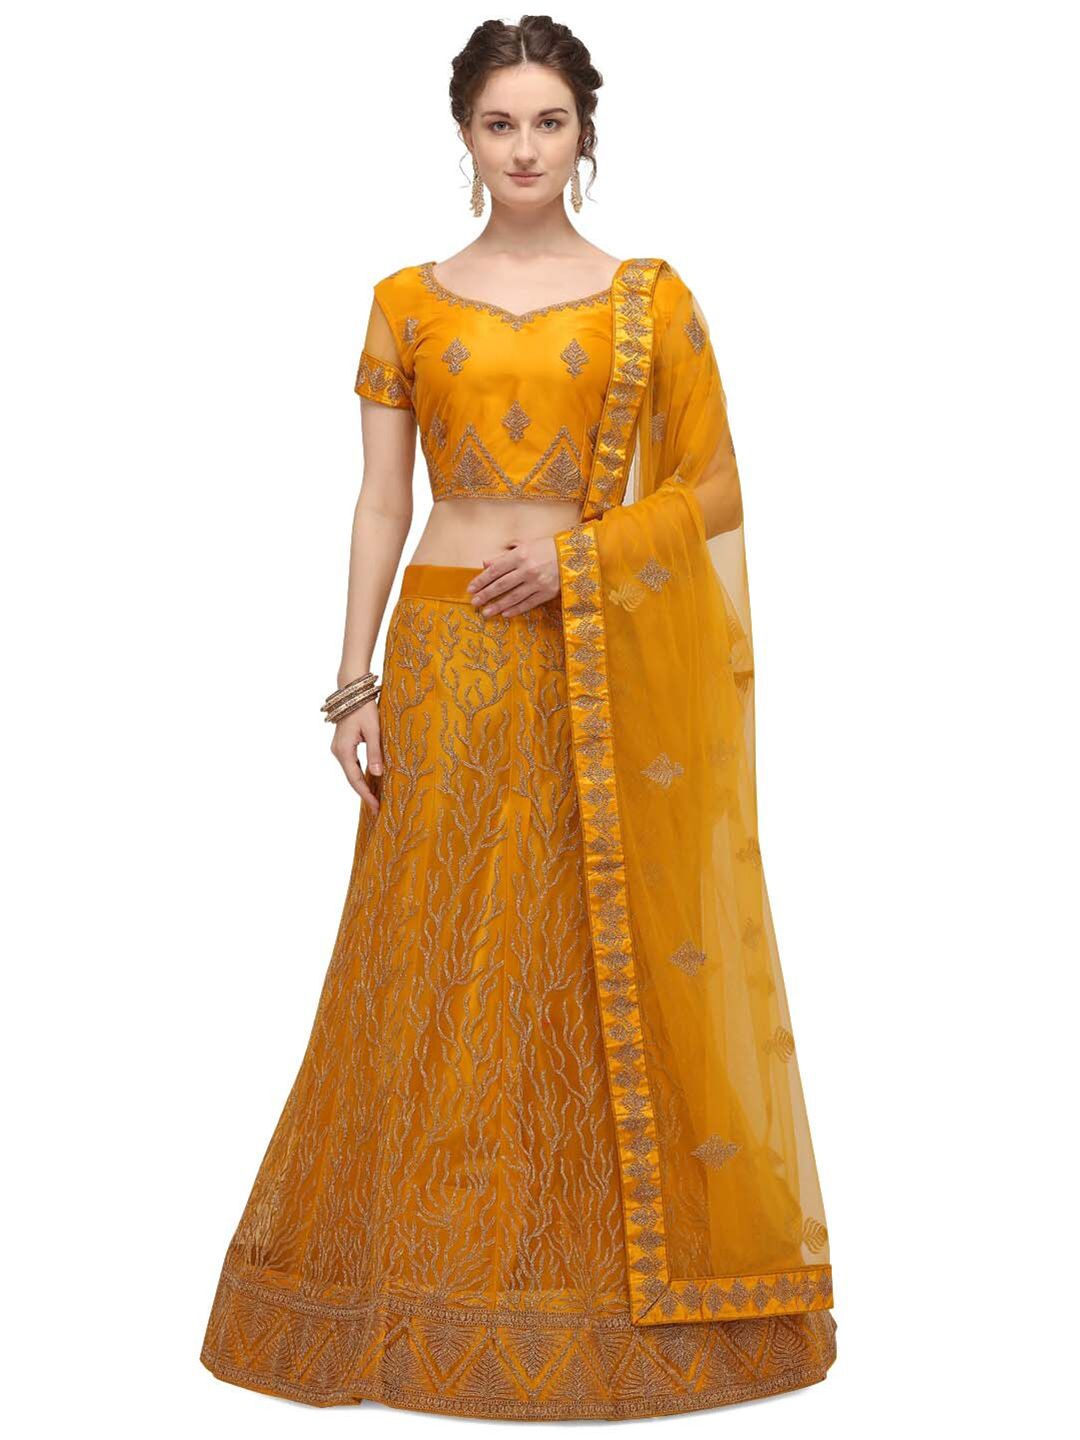 Netram Yellow Embroidered Semi-Stitched Lehenga & Unstitched Blouse With Dupatta Price in India